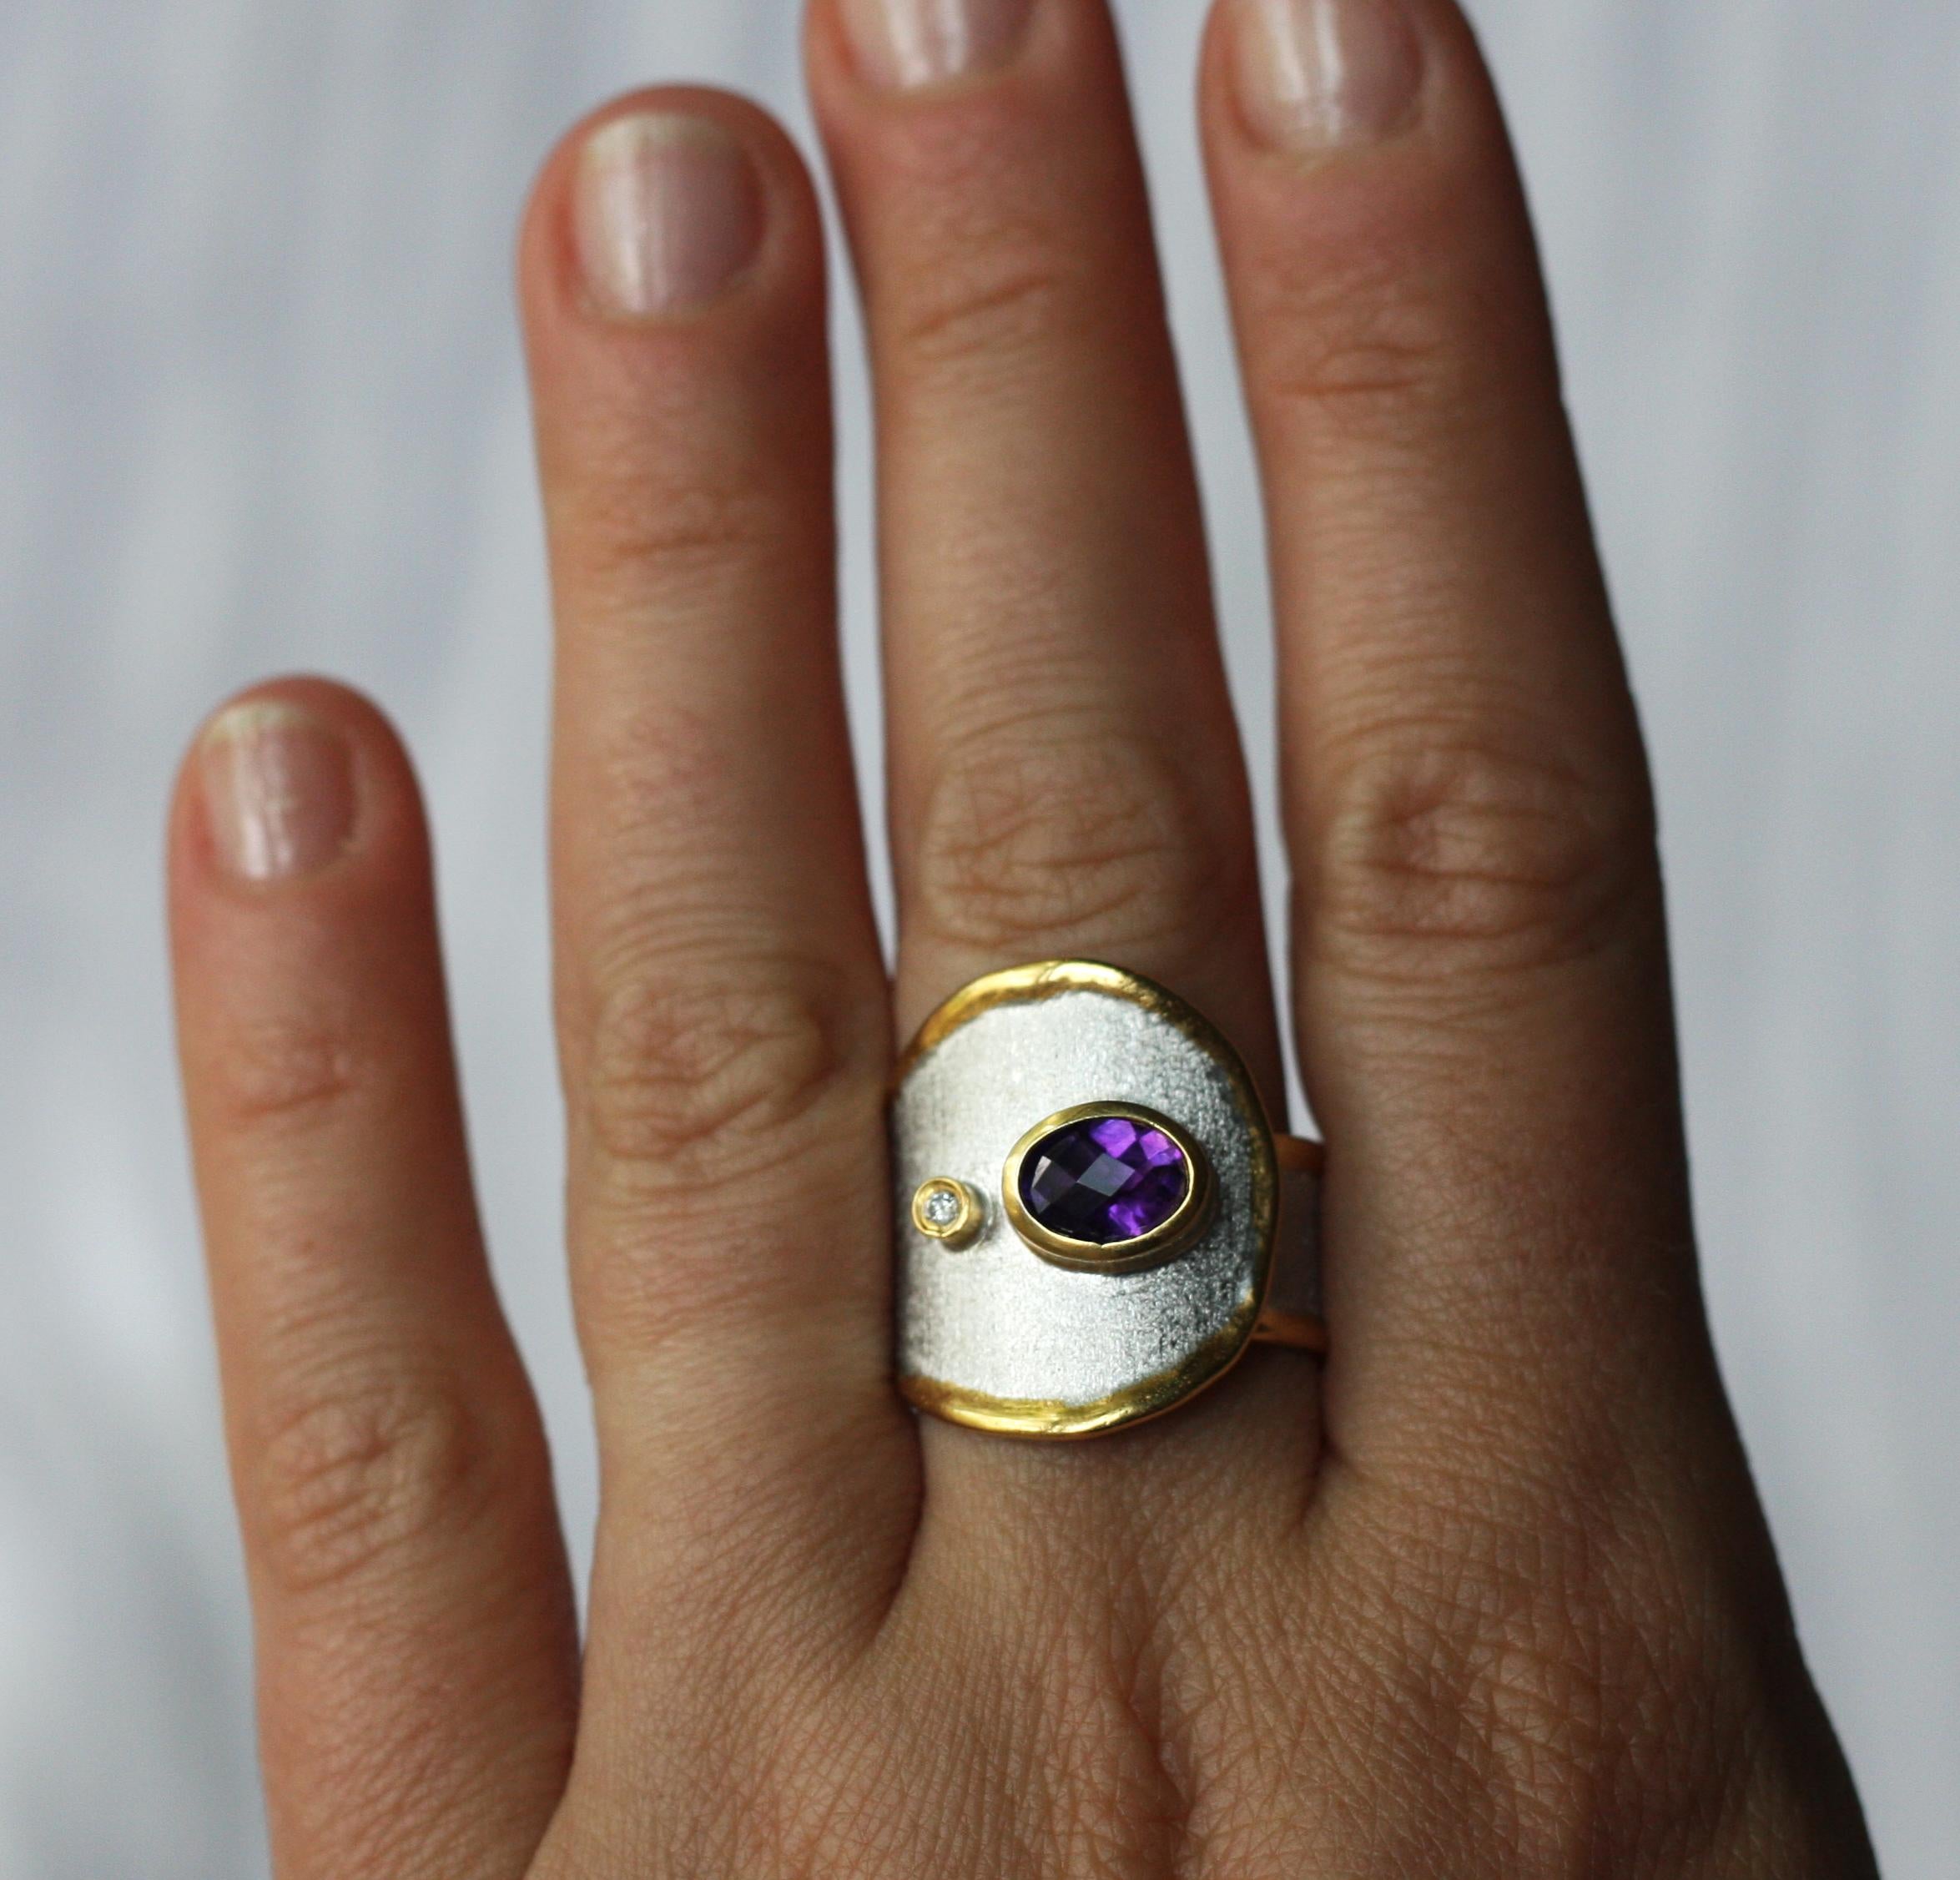 Yianni Creations 1.25 Amethyst and Diamond Ring in Fine Silver and 24 Karat Gold 9